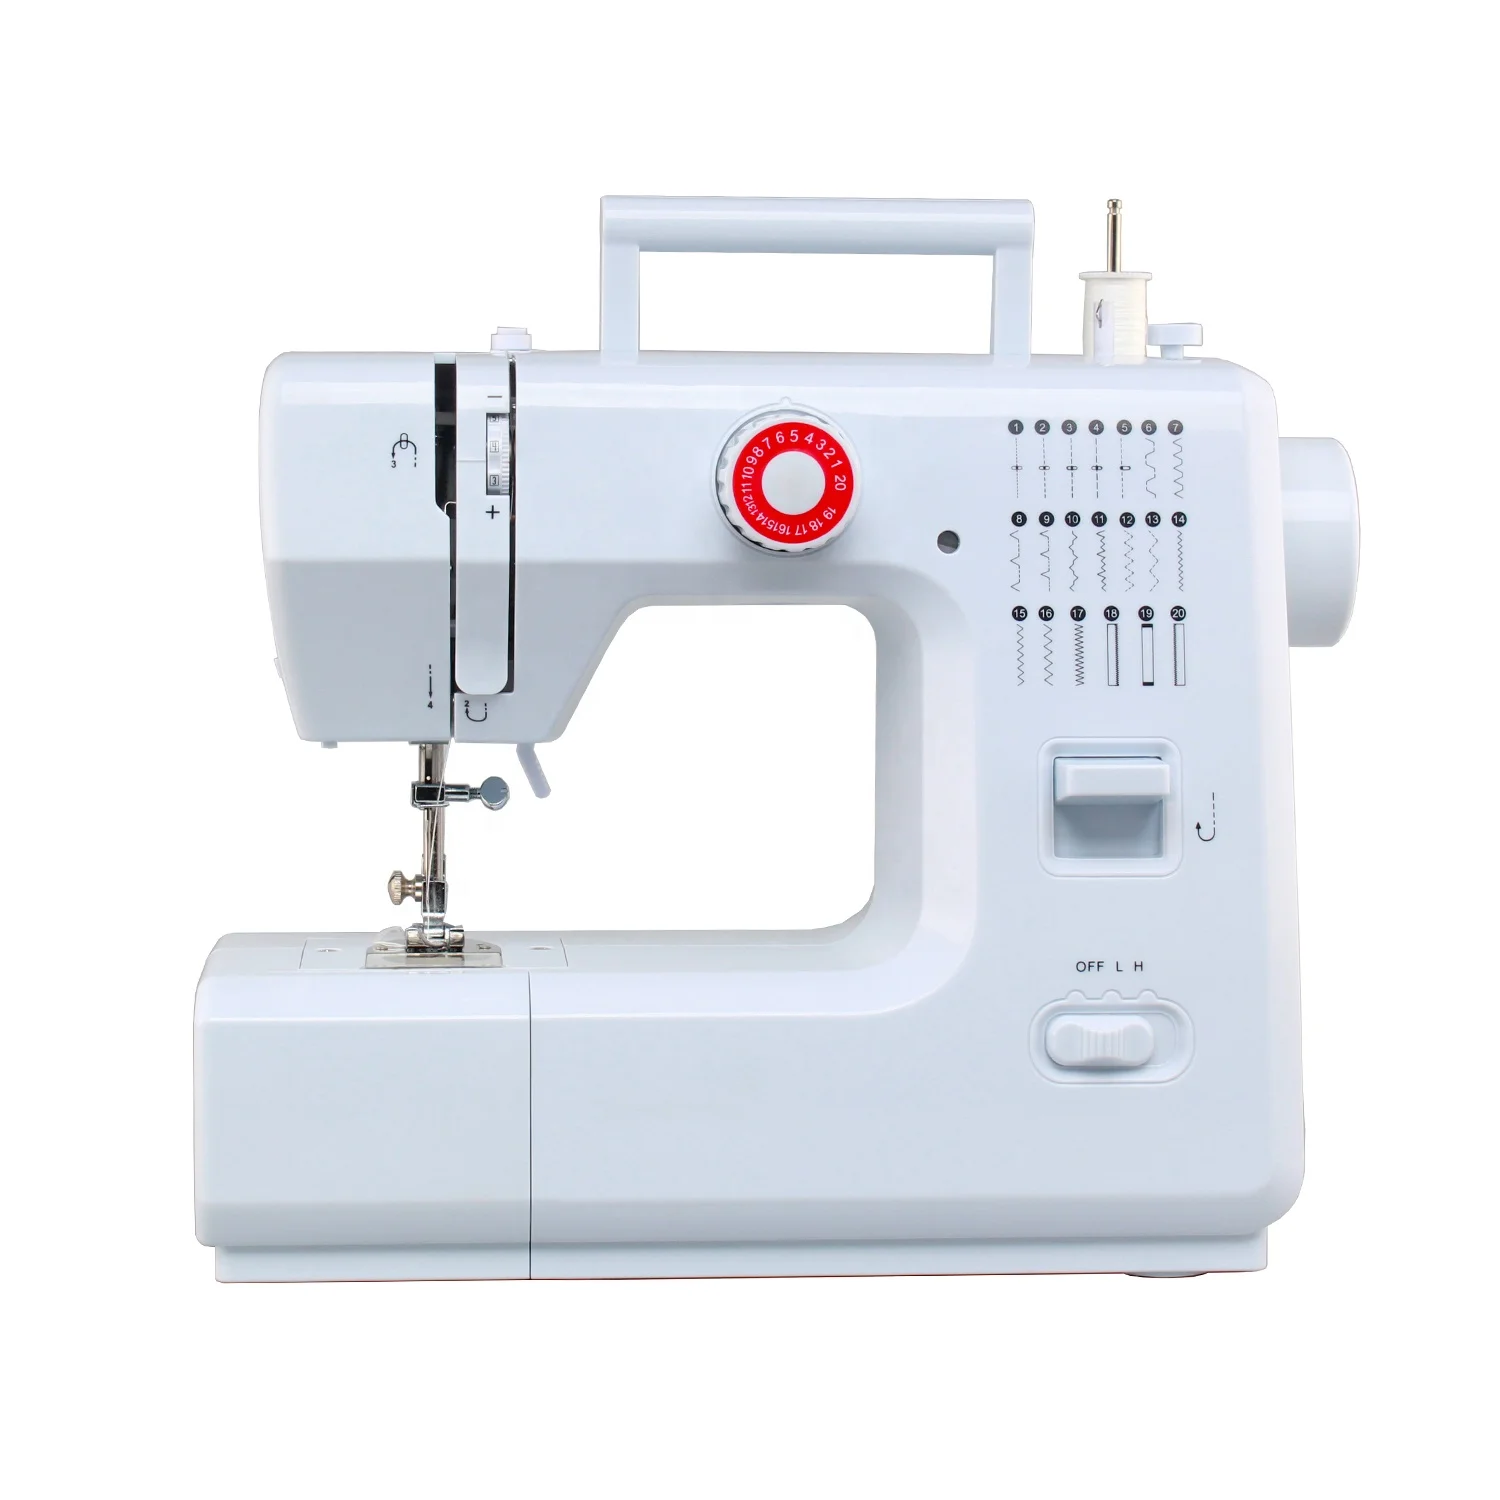 VOF FHSM 618 newly tailoring leather machine for sewing Electric starter buttonhole bobbin cloth Sewing Machine (1600293075594)